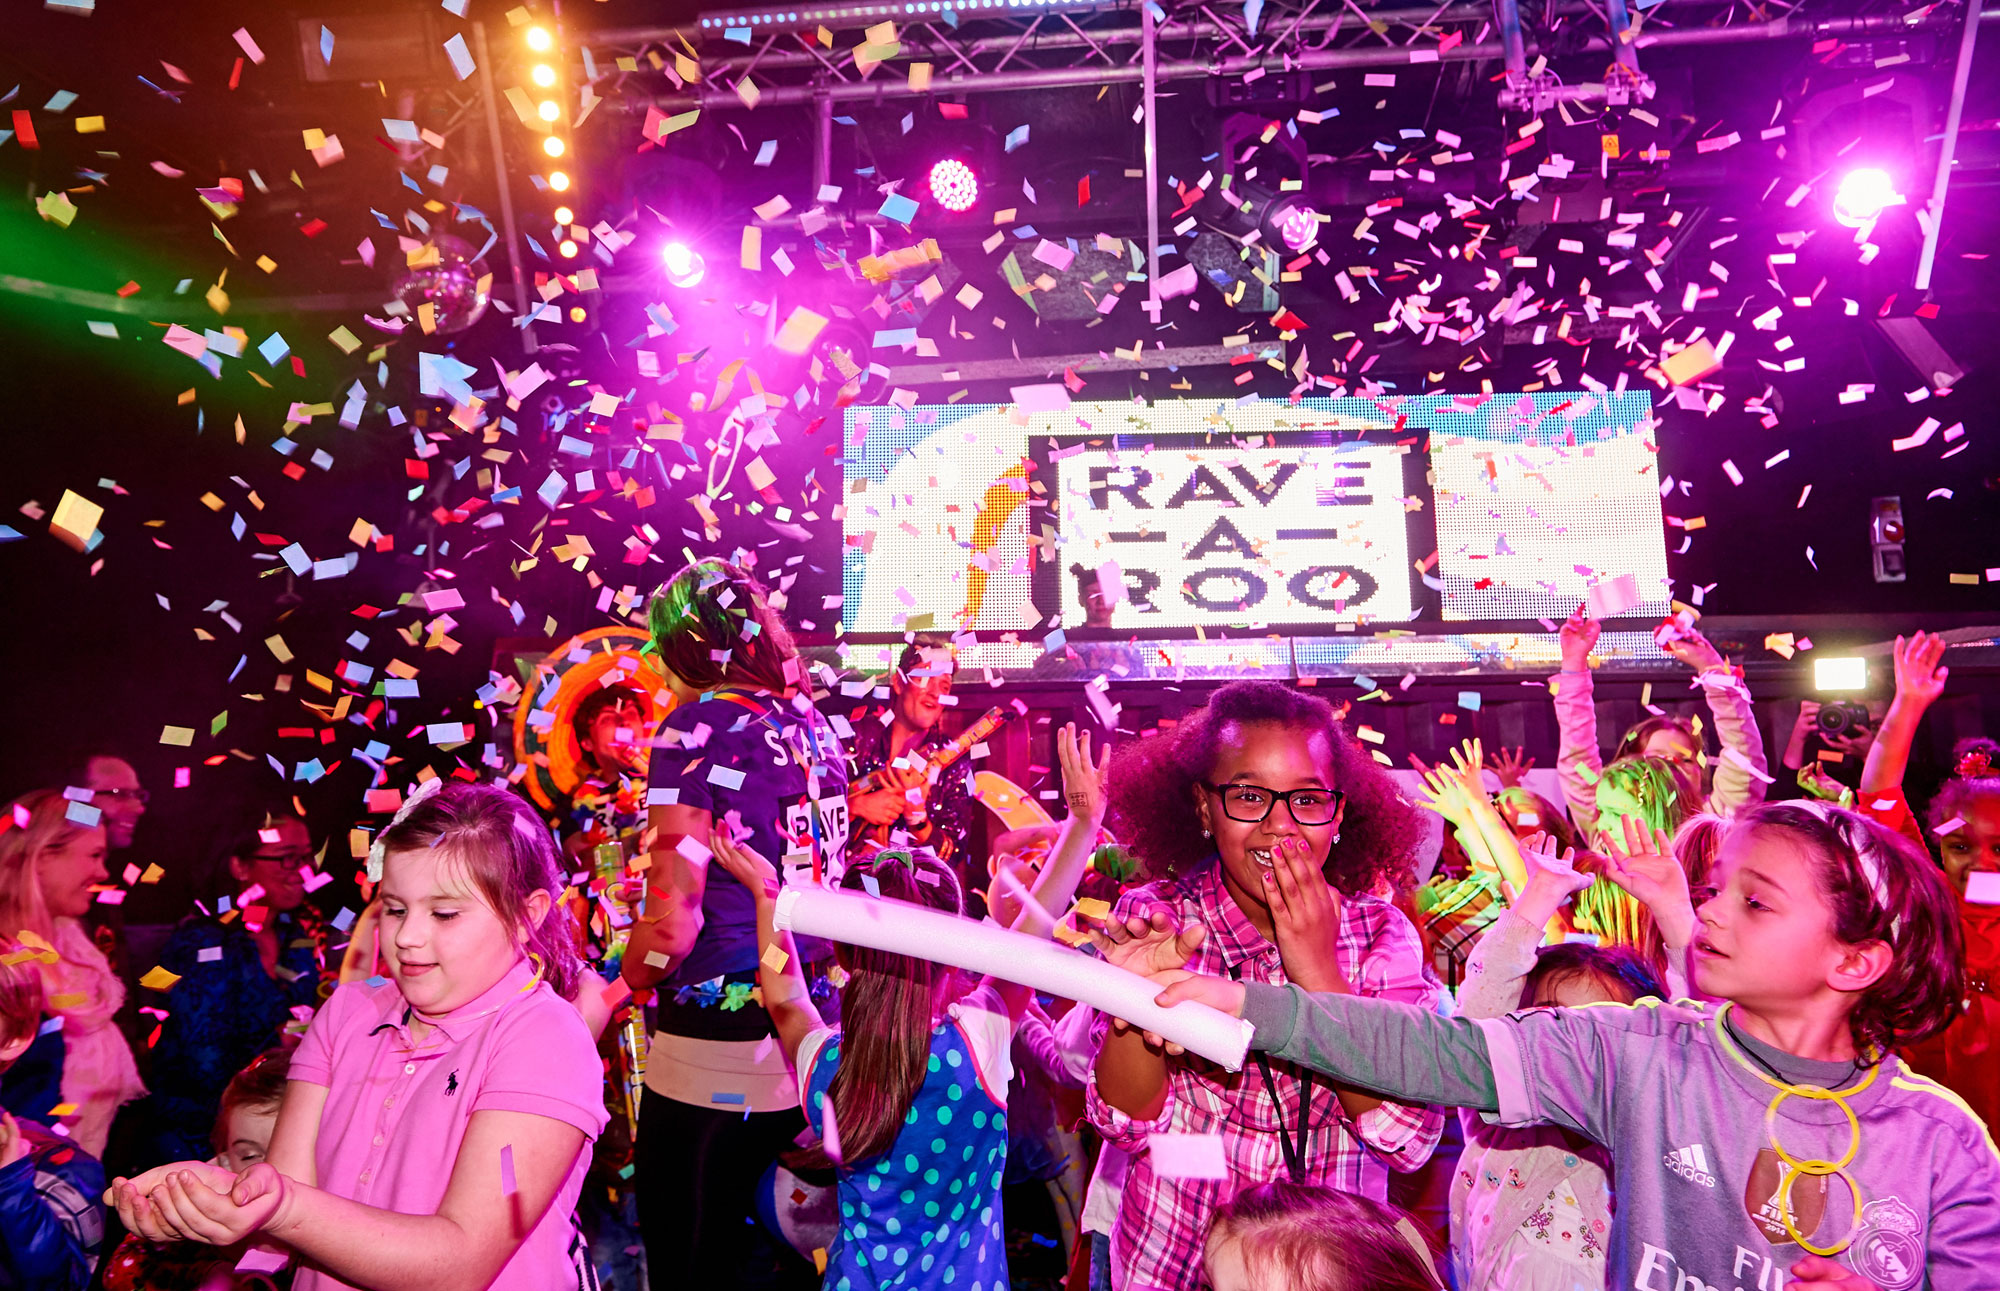 A rave for kids, discovered on the Hoop app